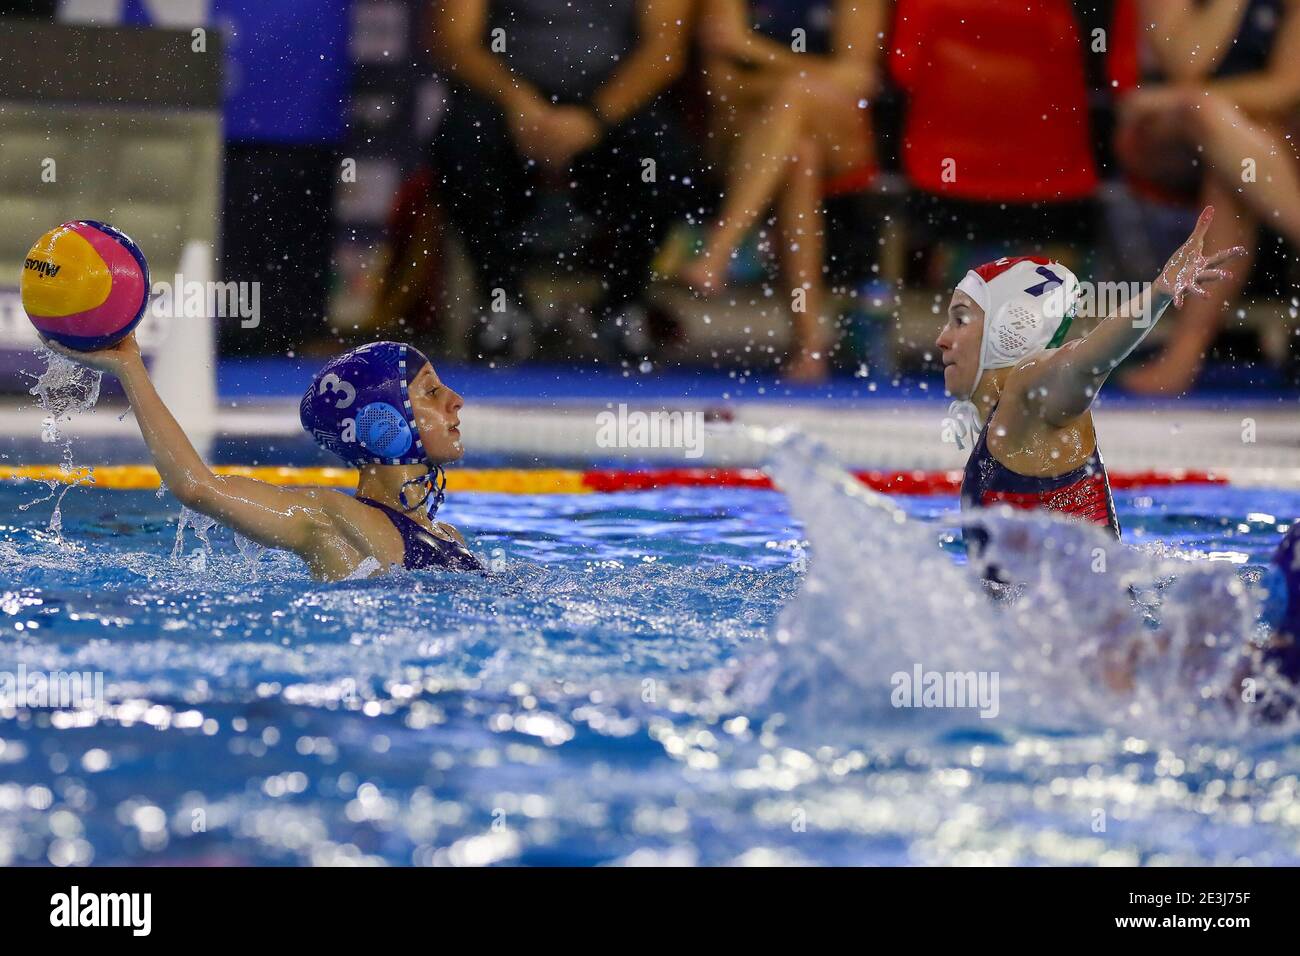 TRIESTE, ITALY - JANUARY 19: Tahel Levi of Israel, Anna Illes of Hungary  during the match between Hungary and Israel at Women's Water Polo Olympic  Gam Stock Photo - Alamy